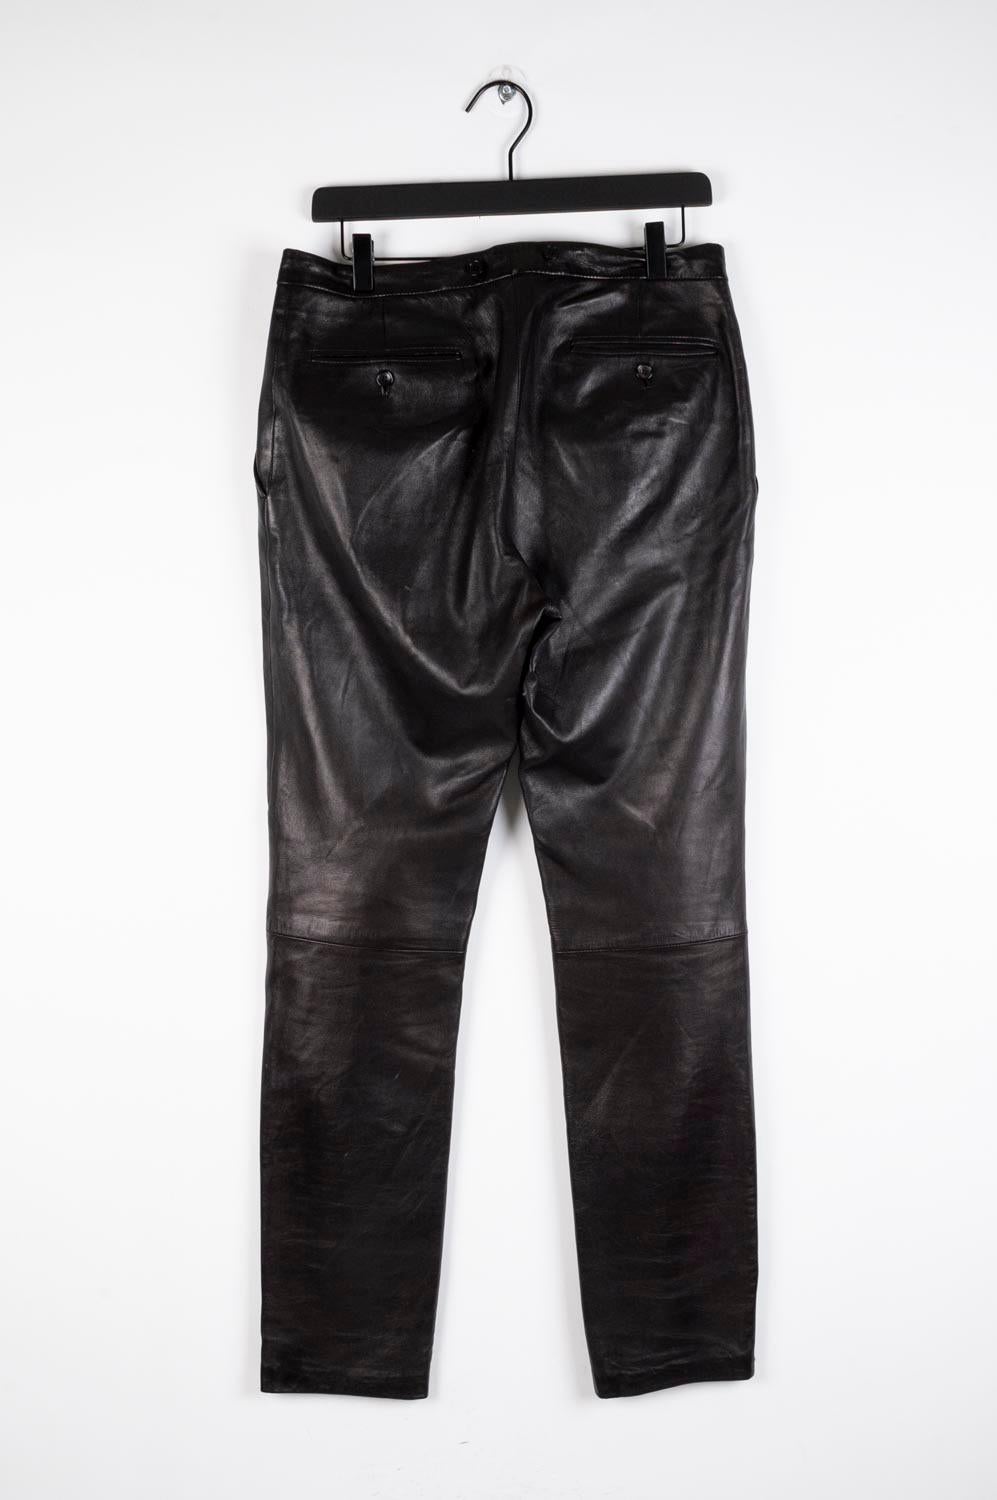 Gucci Leather Men Pants with suspenders Size 48 (M/L) For Sale 5